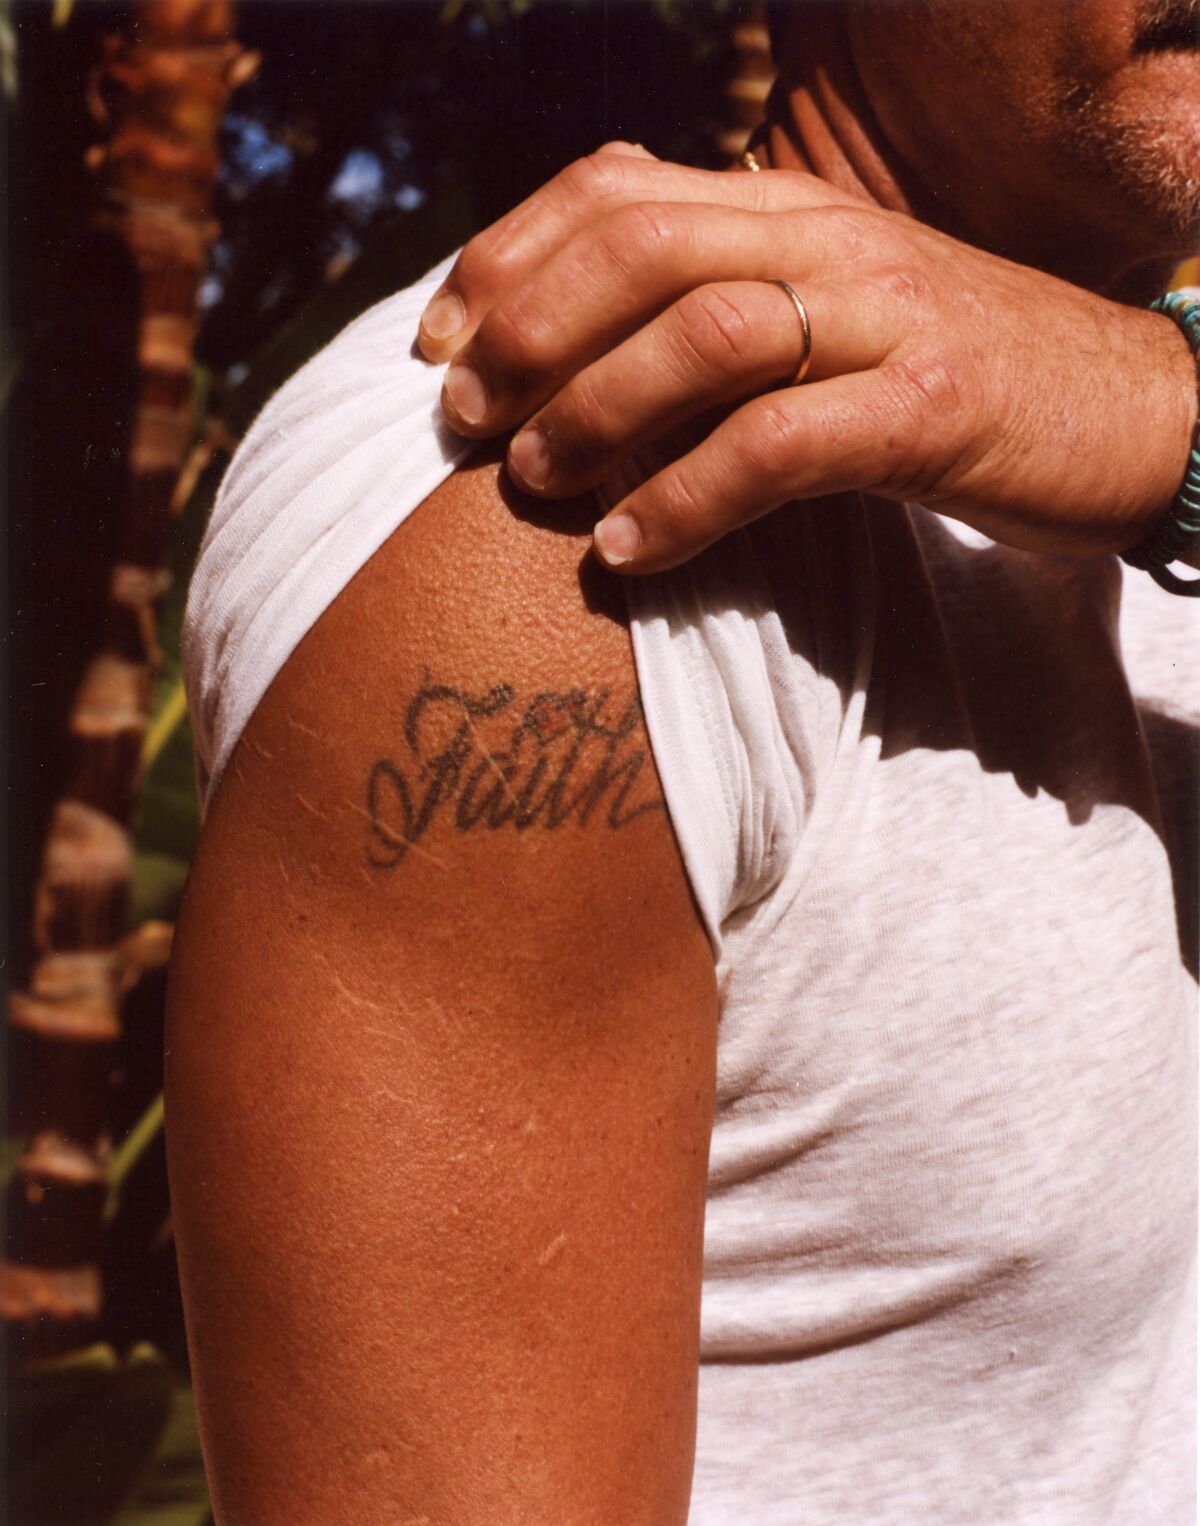 McGraw's tattoo of Faith Hill's name on his shoulder.